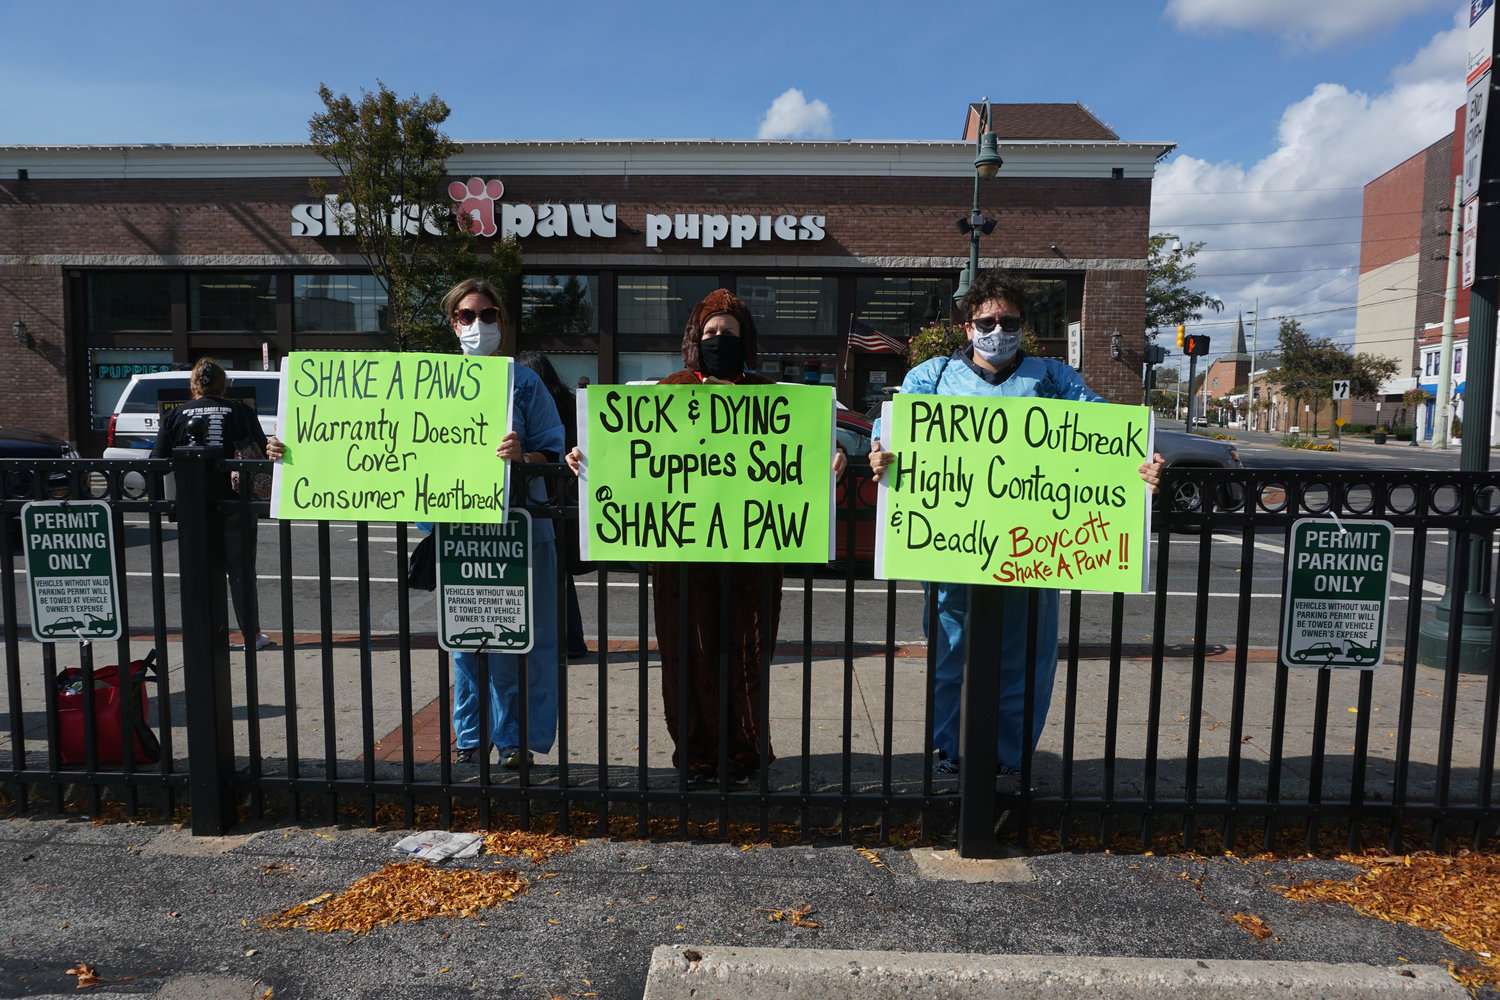 Protesters lined up outside Shake A Paw in Lynbrook on Sunday, seeking to hold the shop accountable for the deaths of puppies sold there.